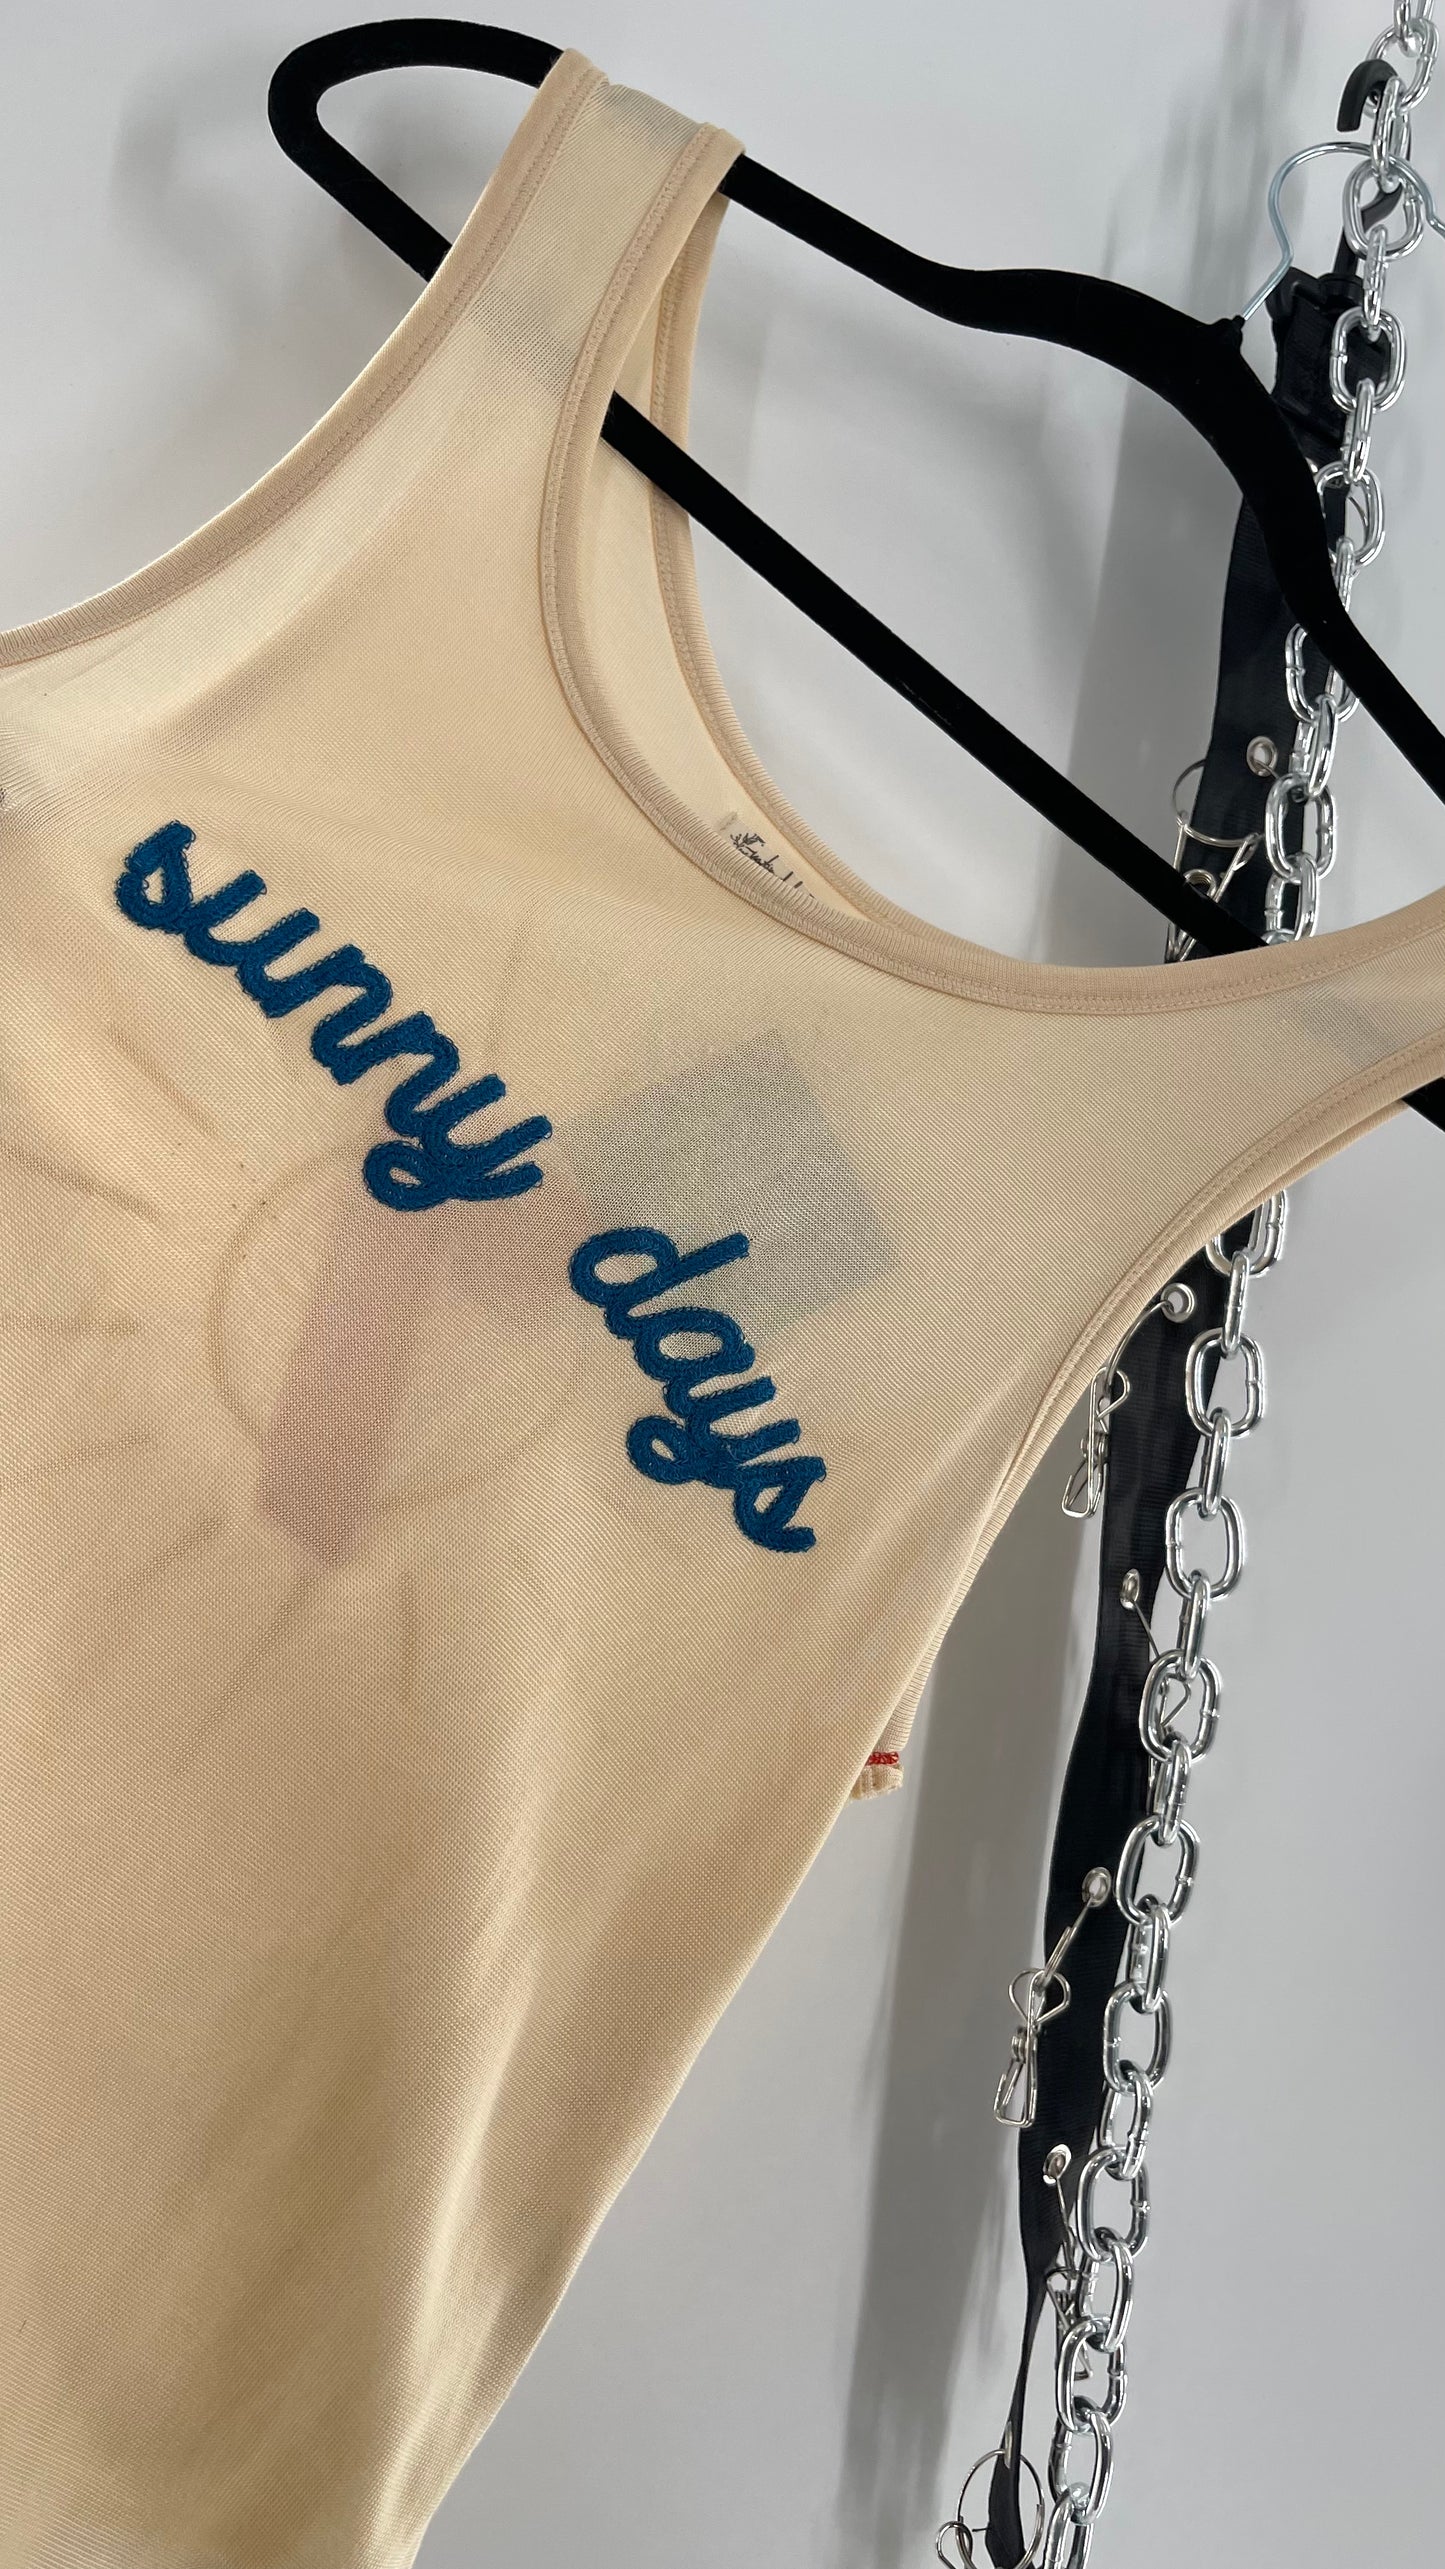 Free People Sunny Days Bodysuit (Small)